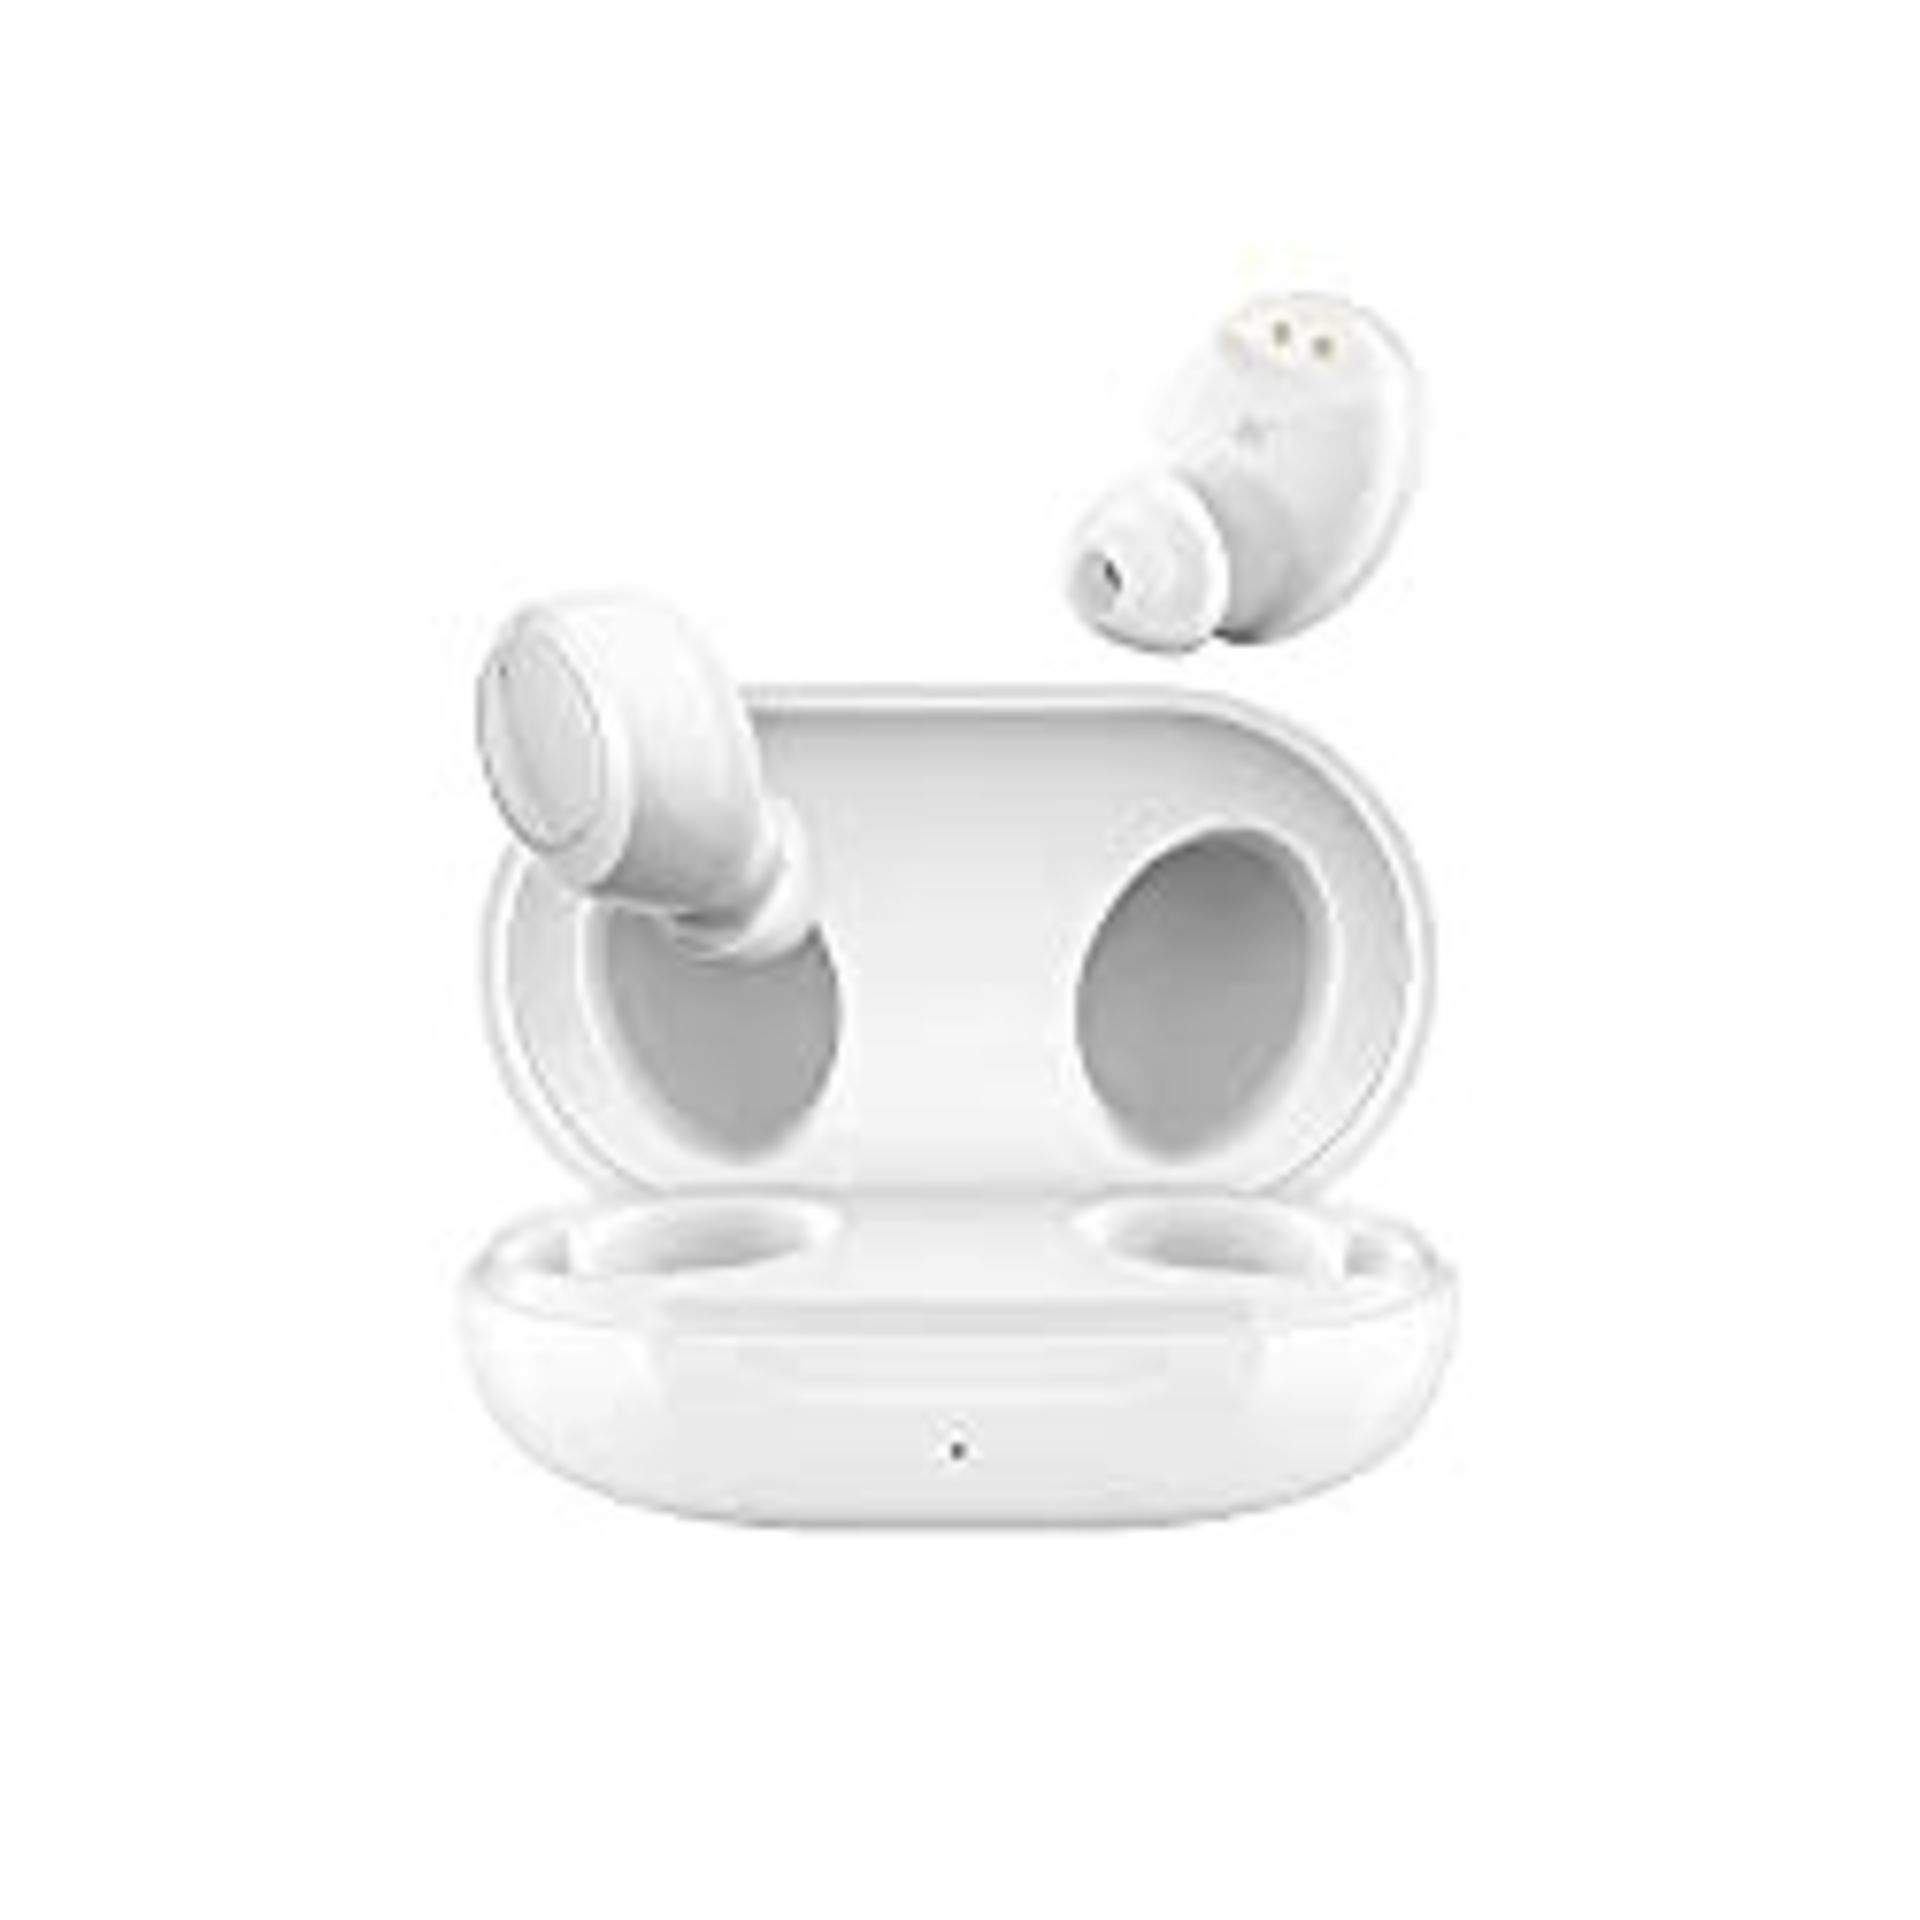 Oppo Enco W11 True Wireless Bluetooth Headphones In-Ear Earbuds Noise Cancellation During Calls